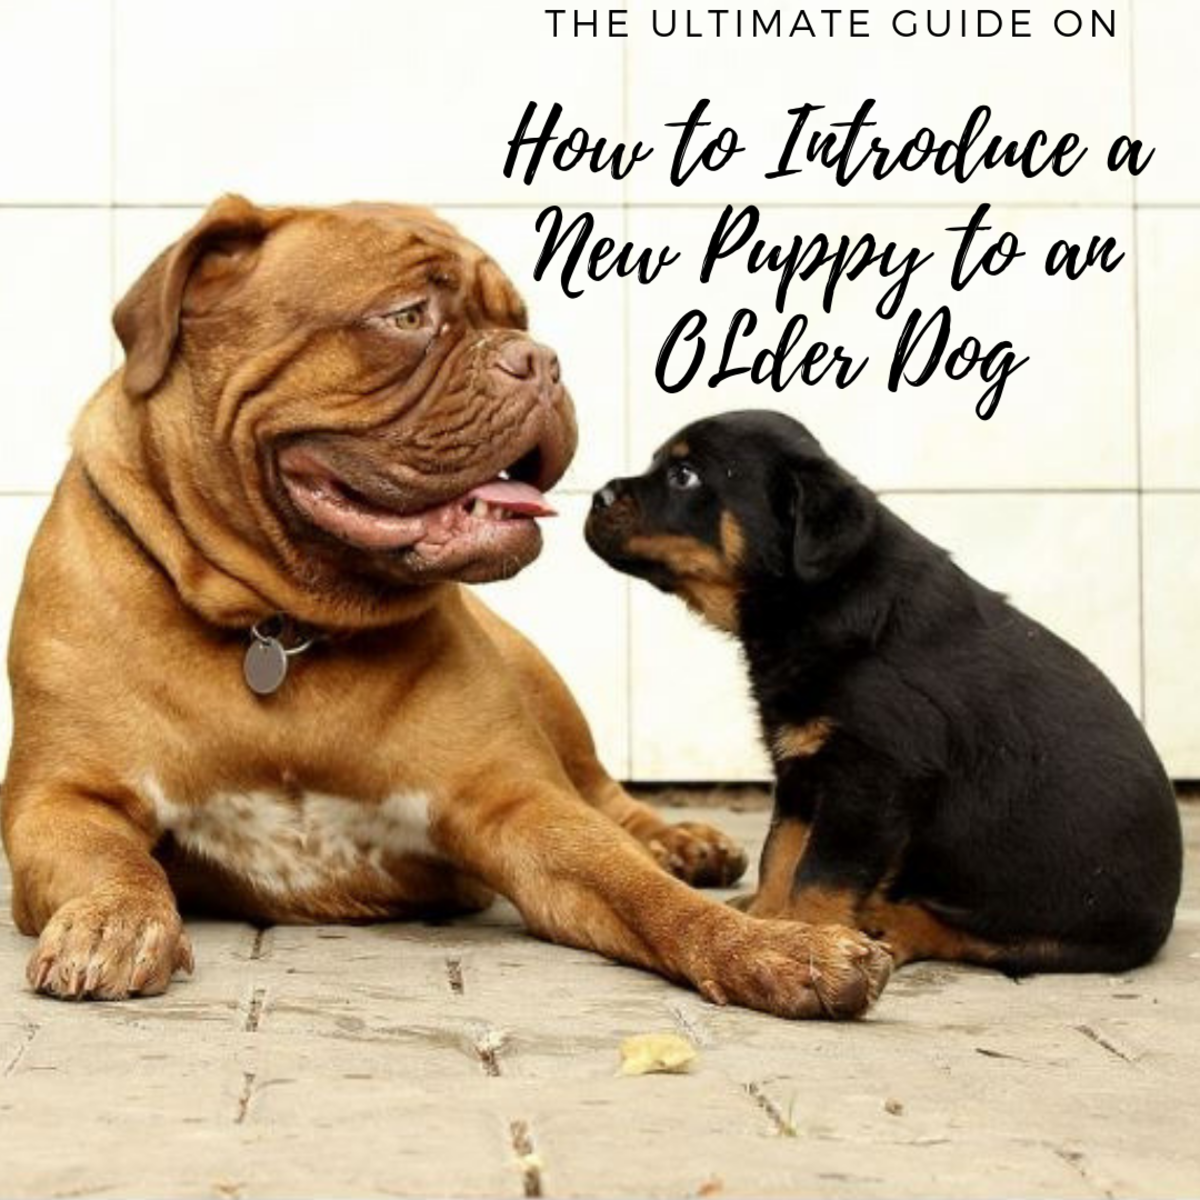 How to Introduce a New Puppy to an Older Dog PetHelpful